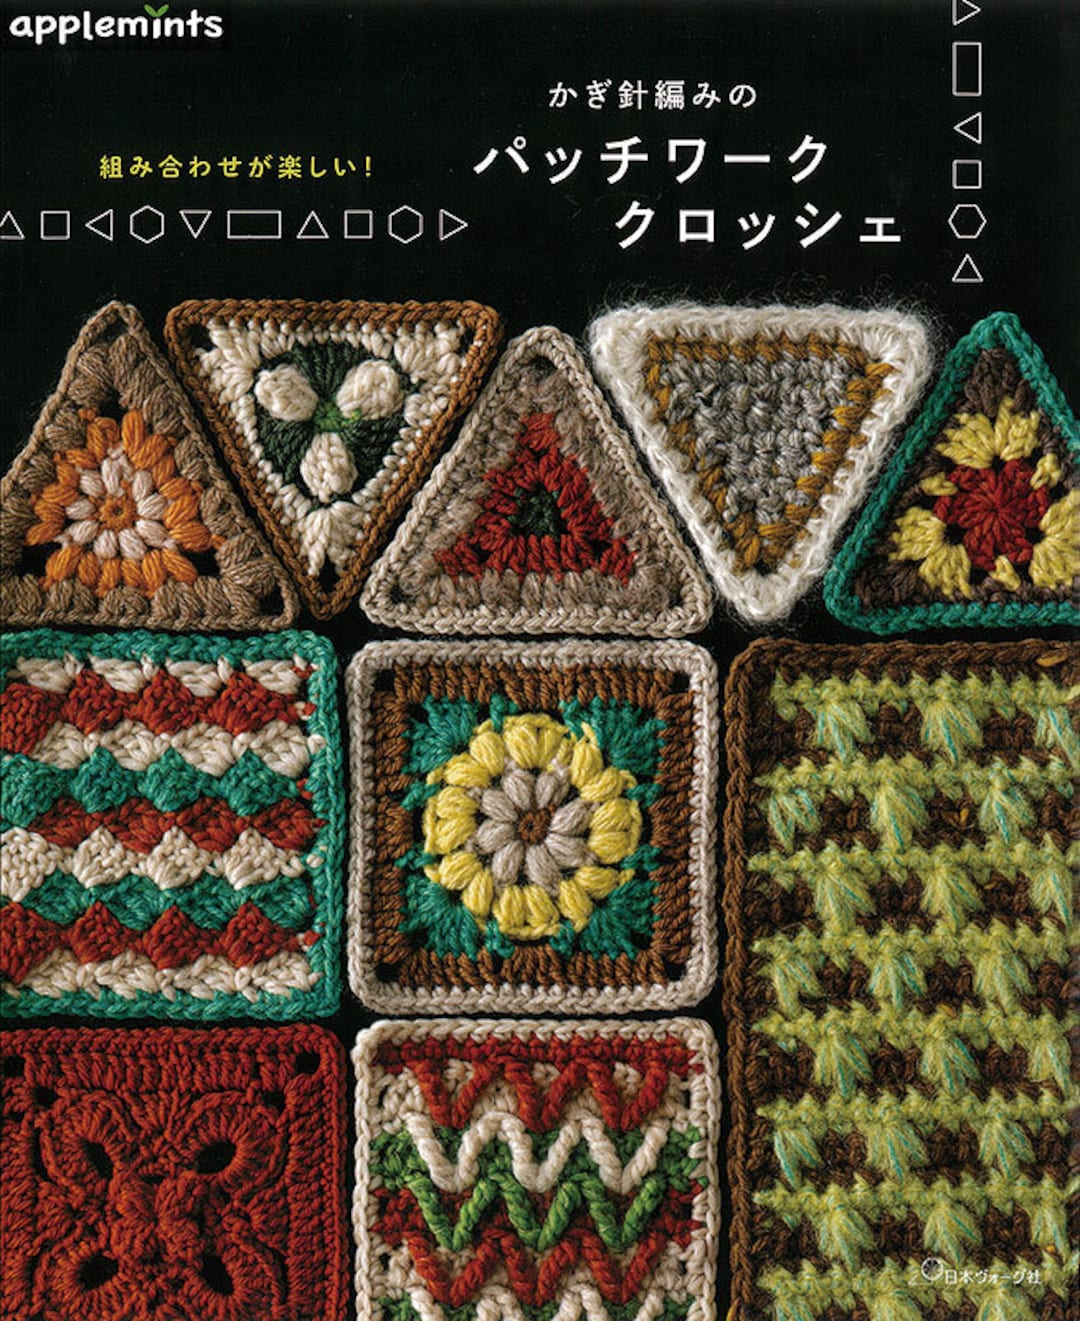 Fun Combinations Patchwork Crochet Items Japanese Craft Book -  Norway